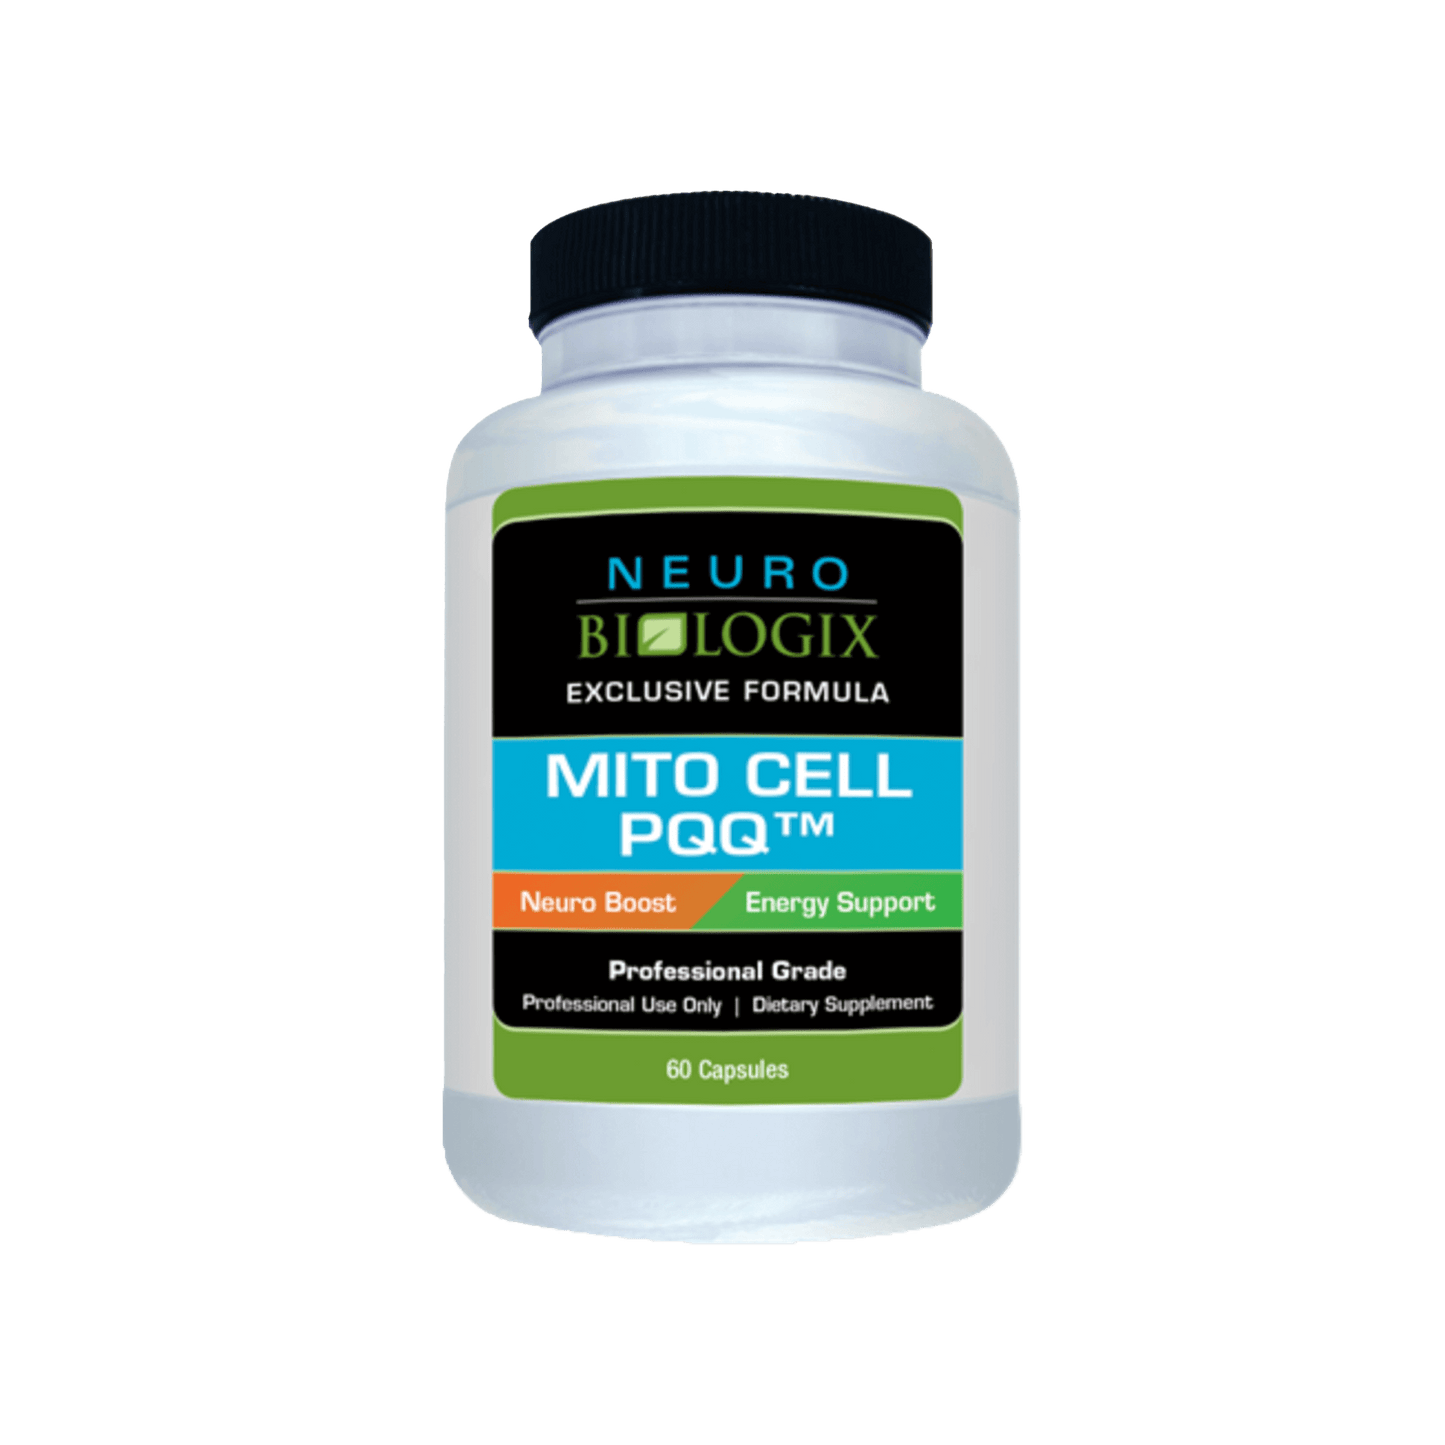 NBX Daily Cell Recharge Capsules